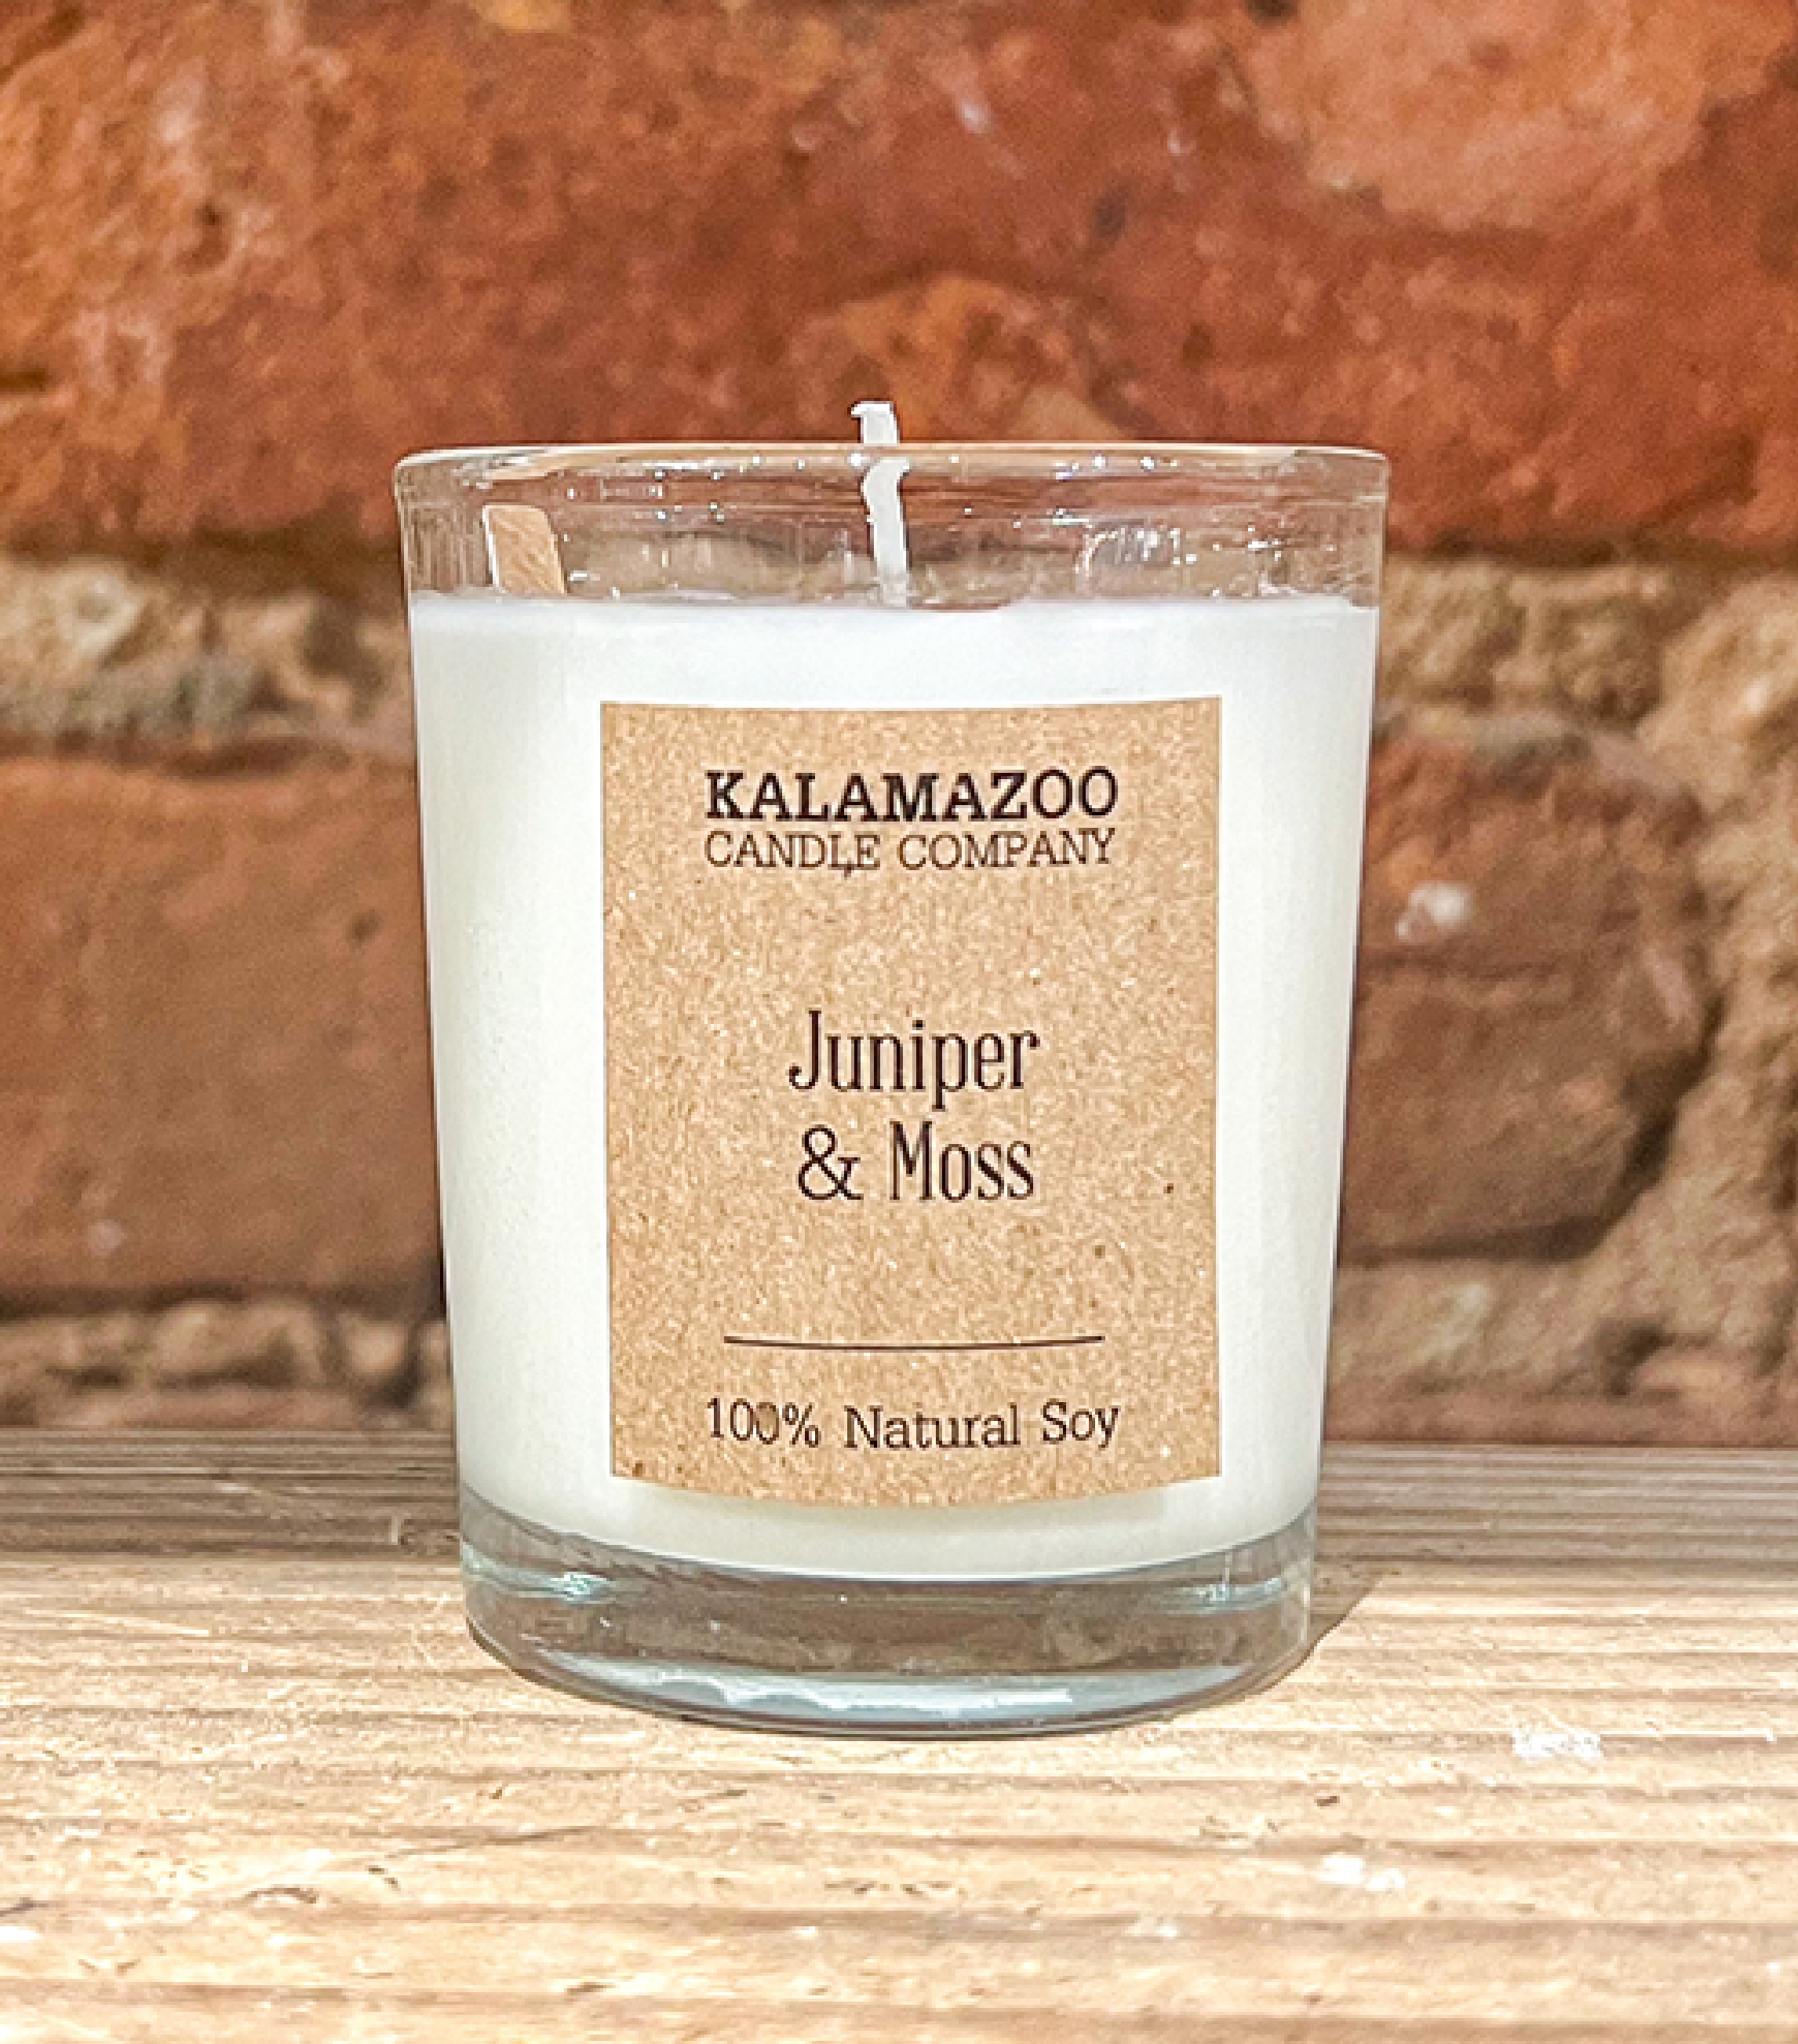 A refreshing burst of cold winter air filled with the smell of Douglas Fir trees and frosted Juniper Berries. Made with 100% Soy Wax and Locally Sourced Ingredients.